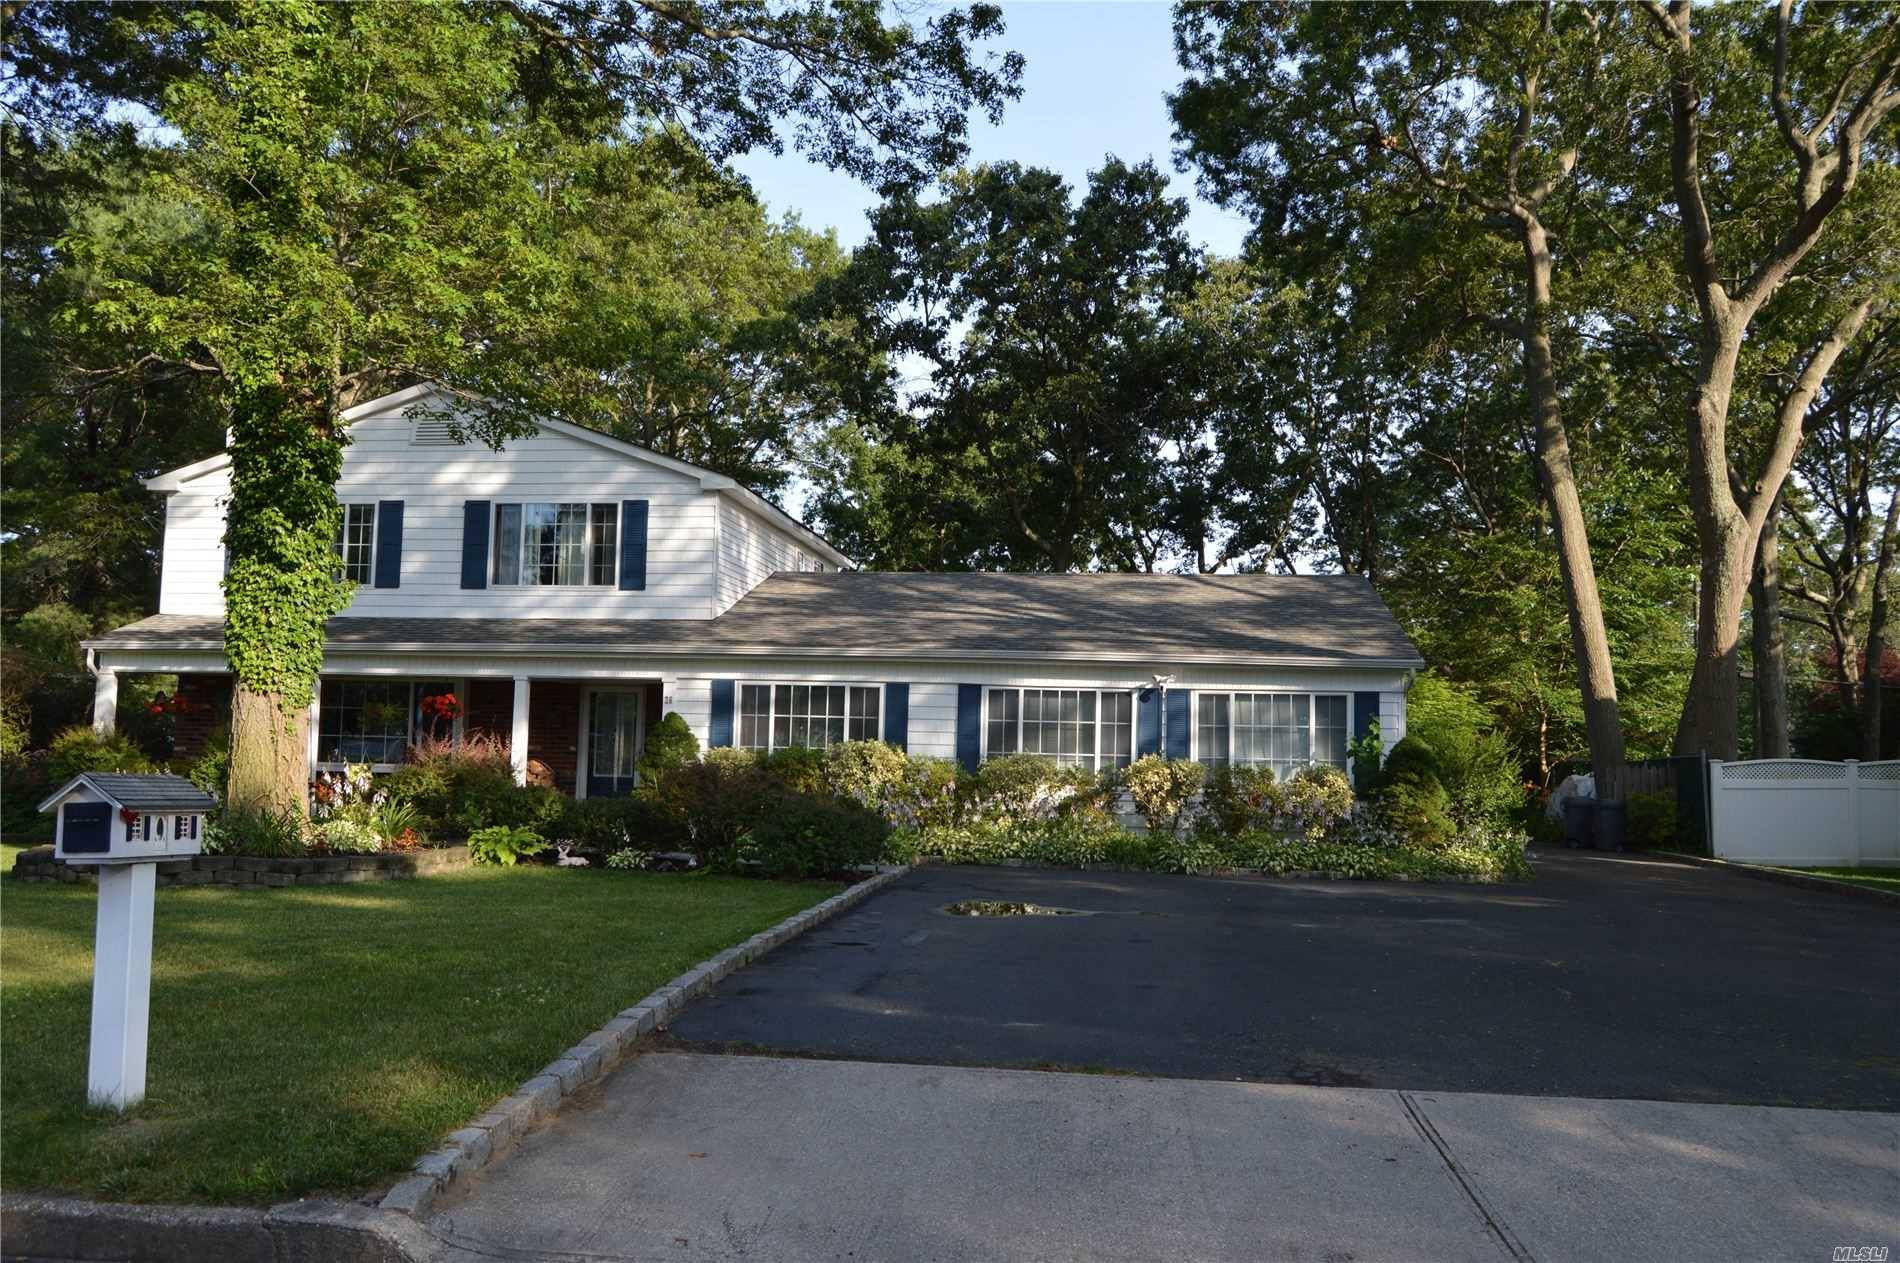 Beautiful 4 Br 3 Full Bath Colonial Eik with Quartz Counter Top an Stainless Steel Appliances Formal Living Room Formal Dining Room Den w Fireplace Master Bedroom with Master Bath ...